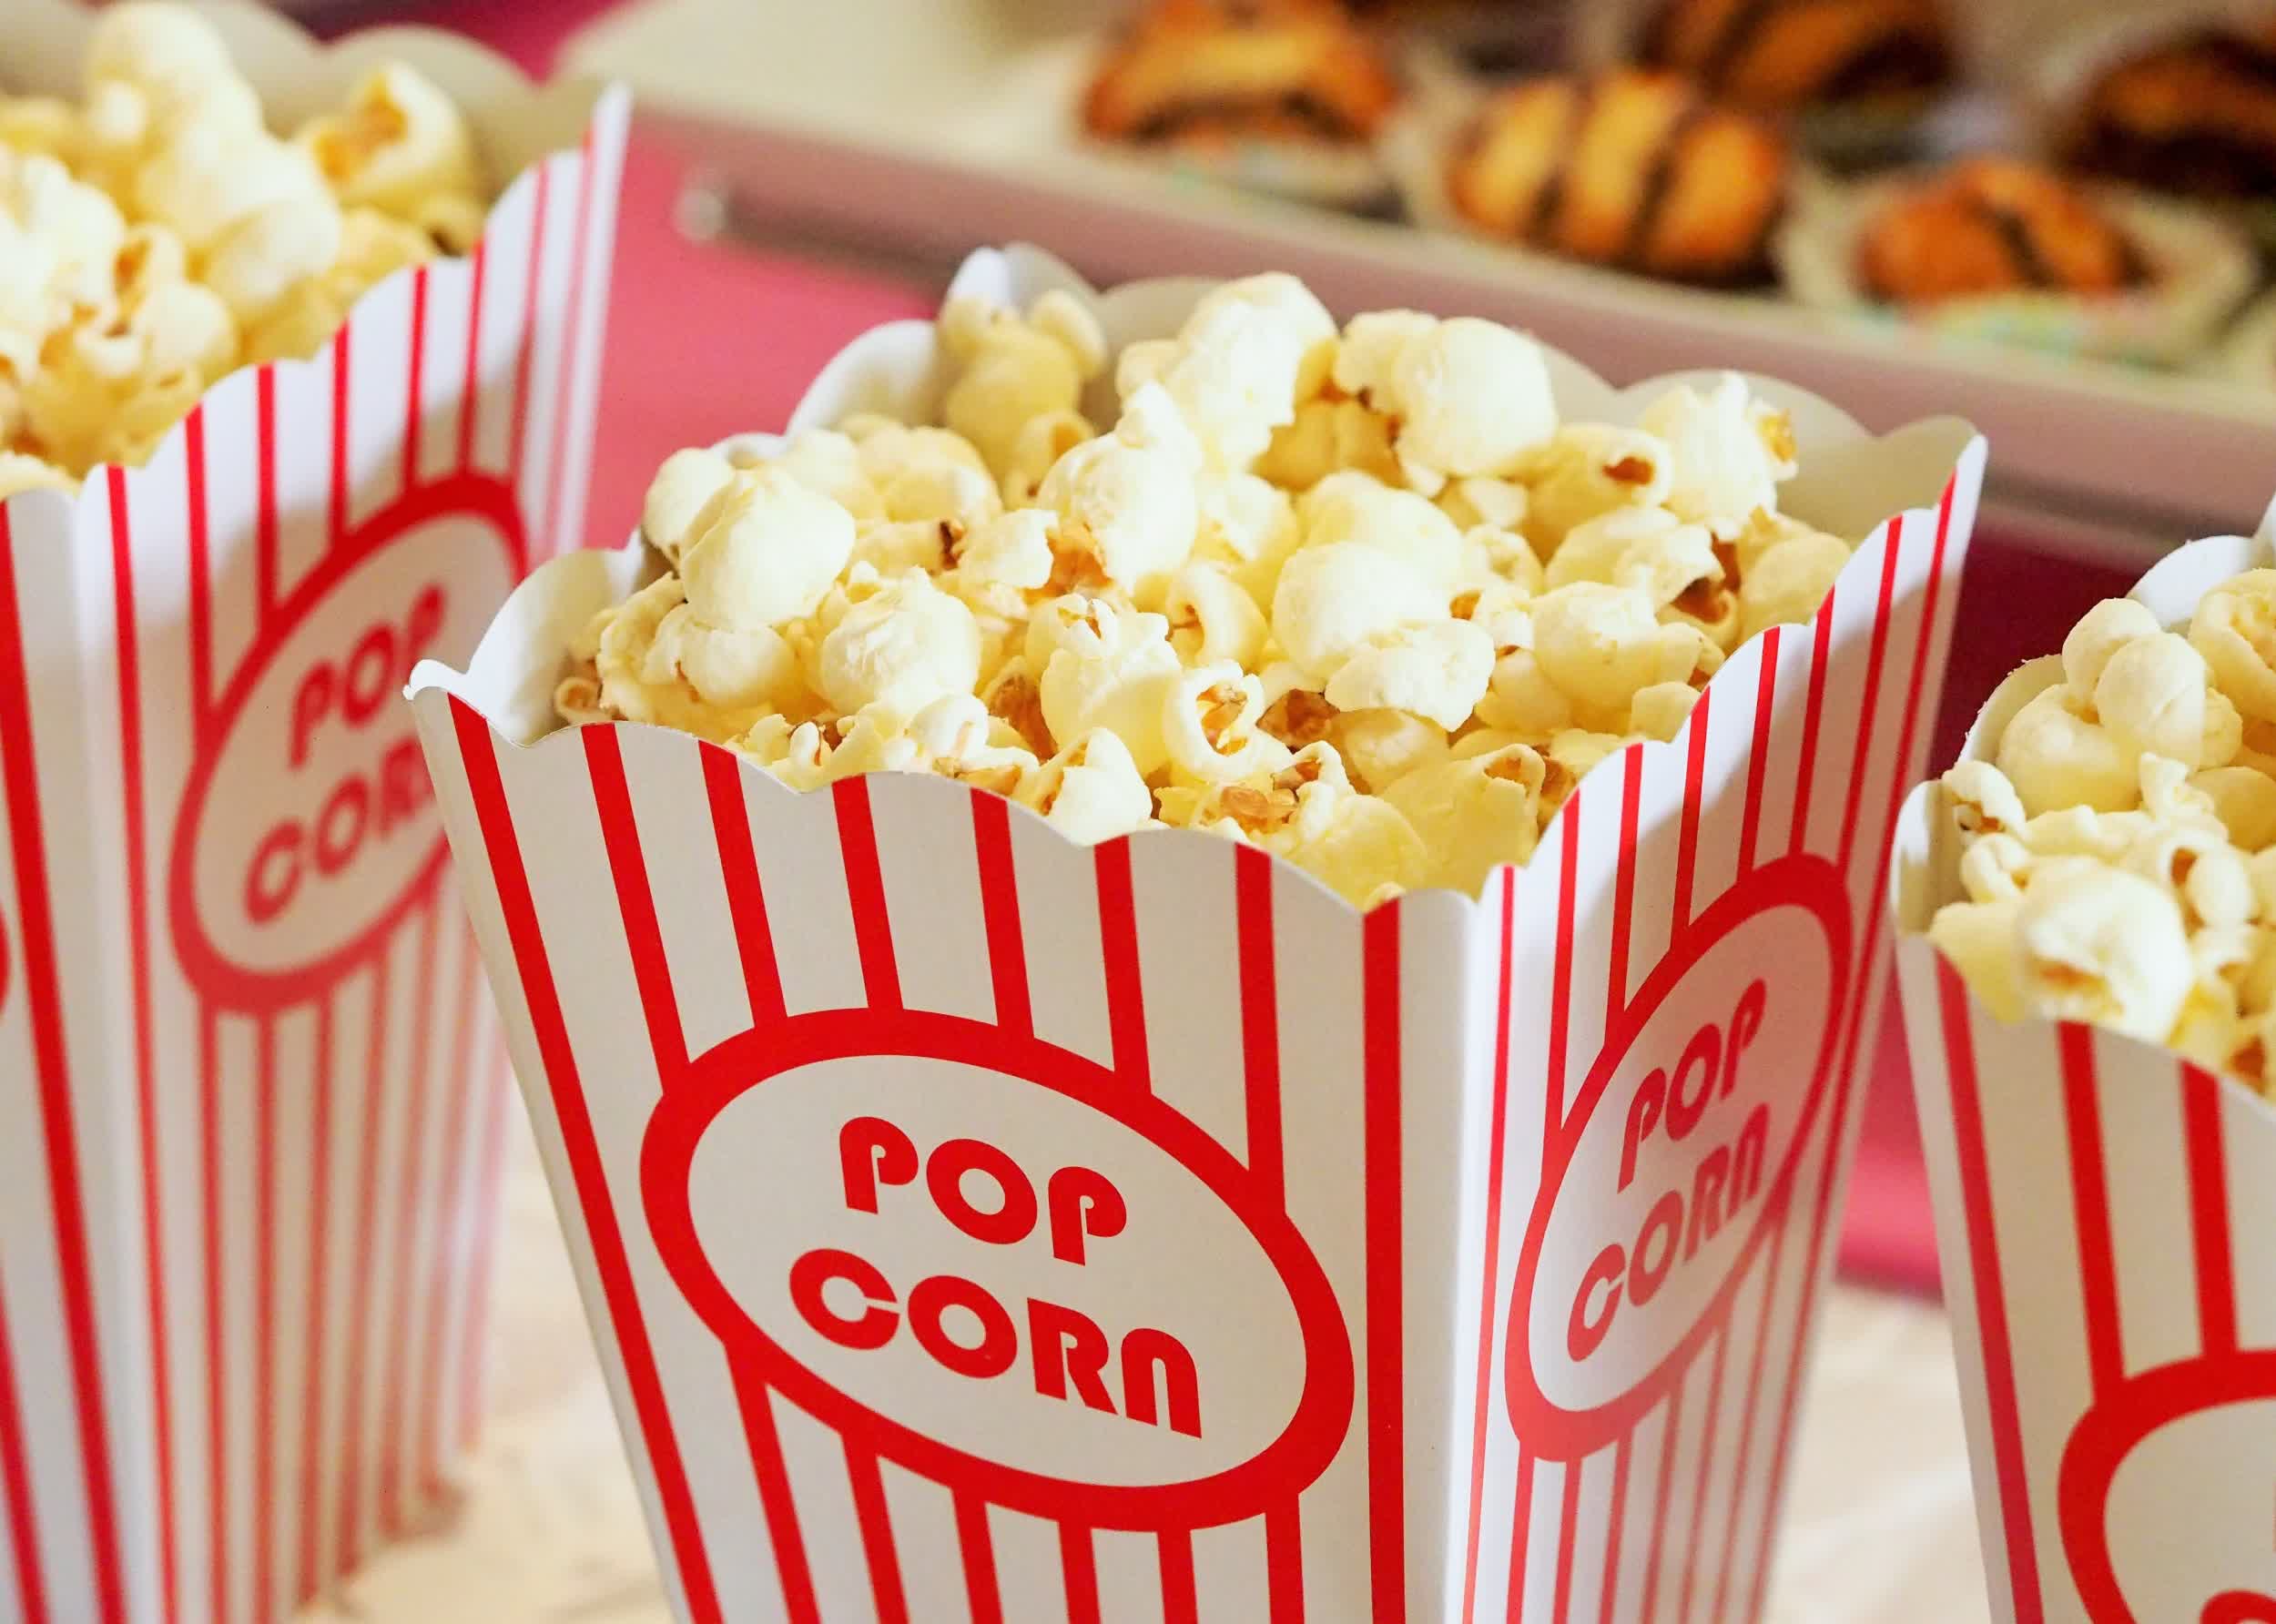 Researchers propose infrared popcorn popper